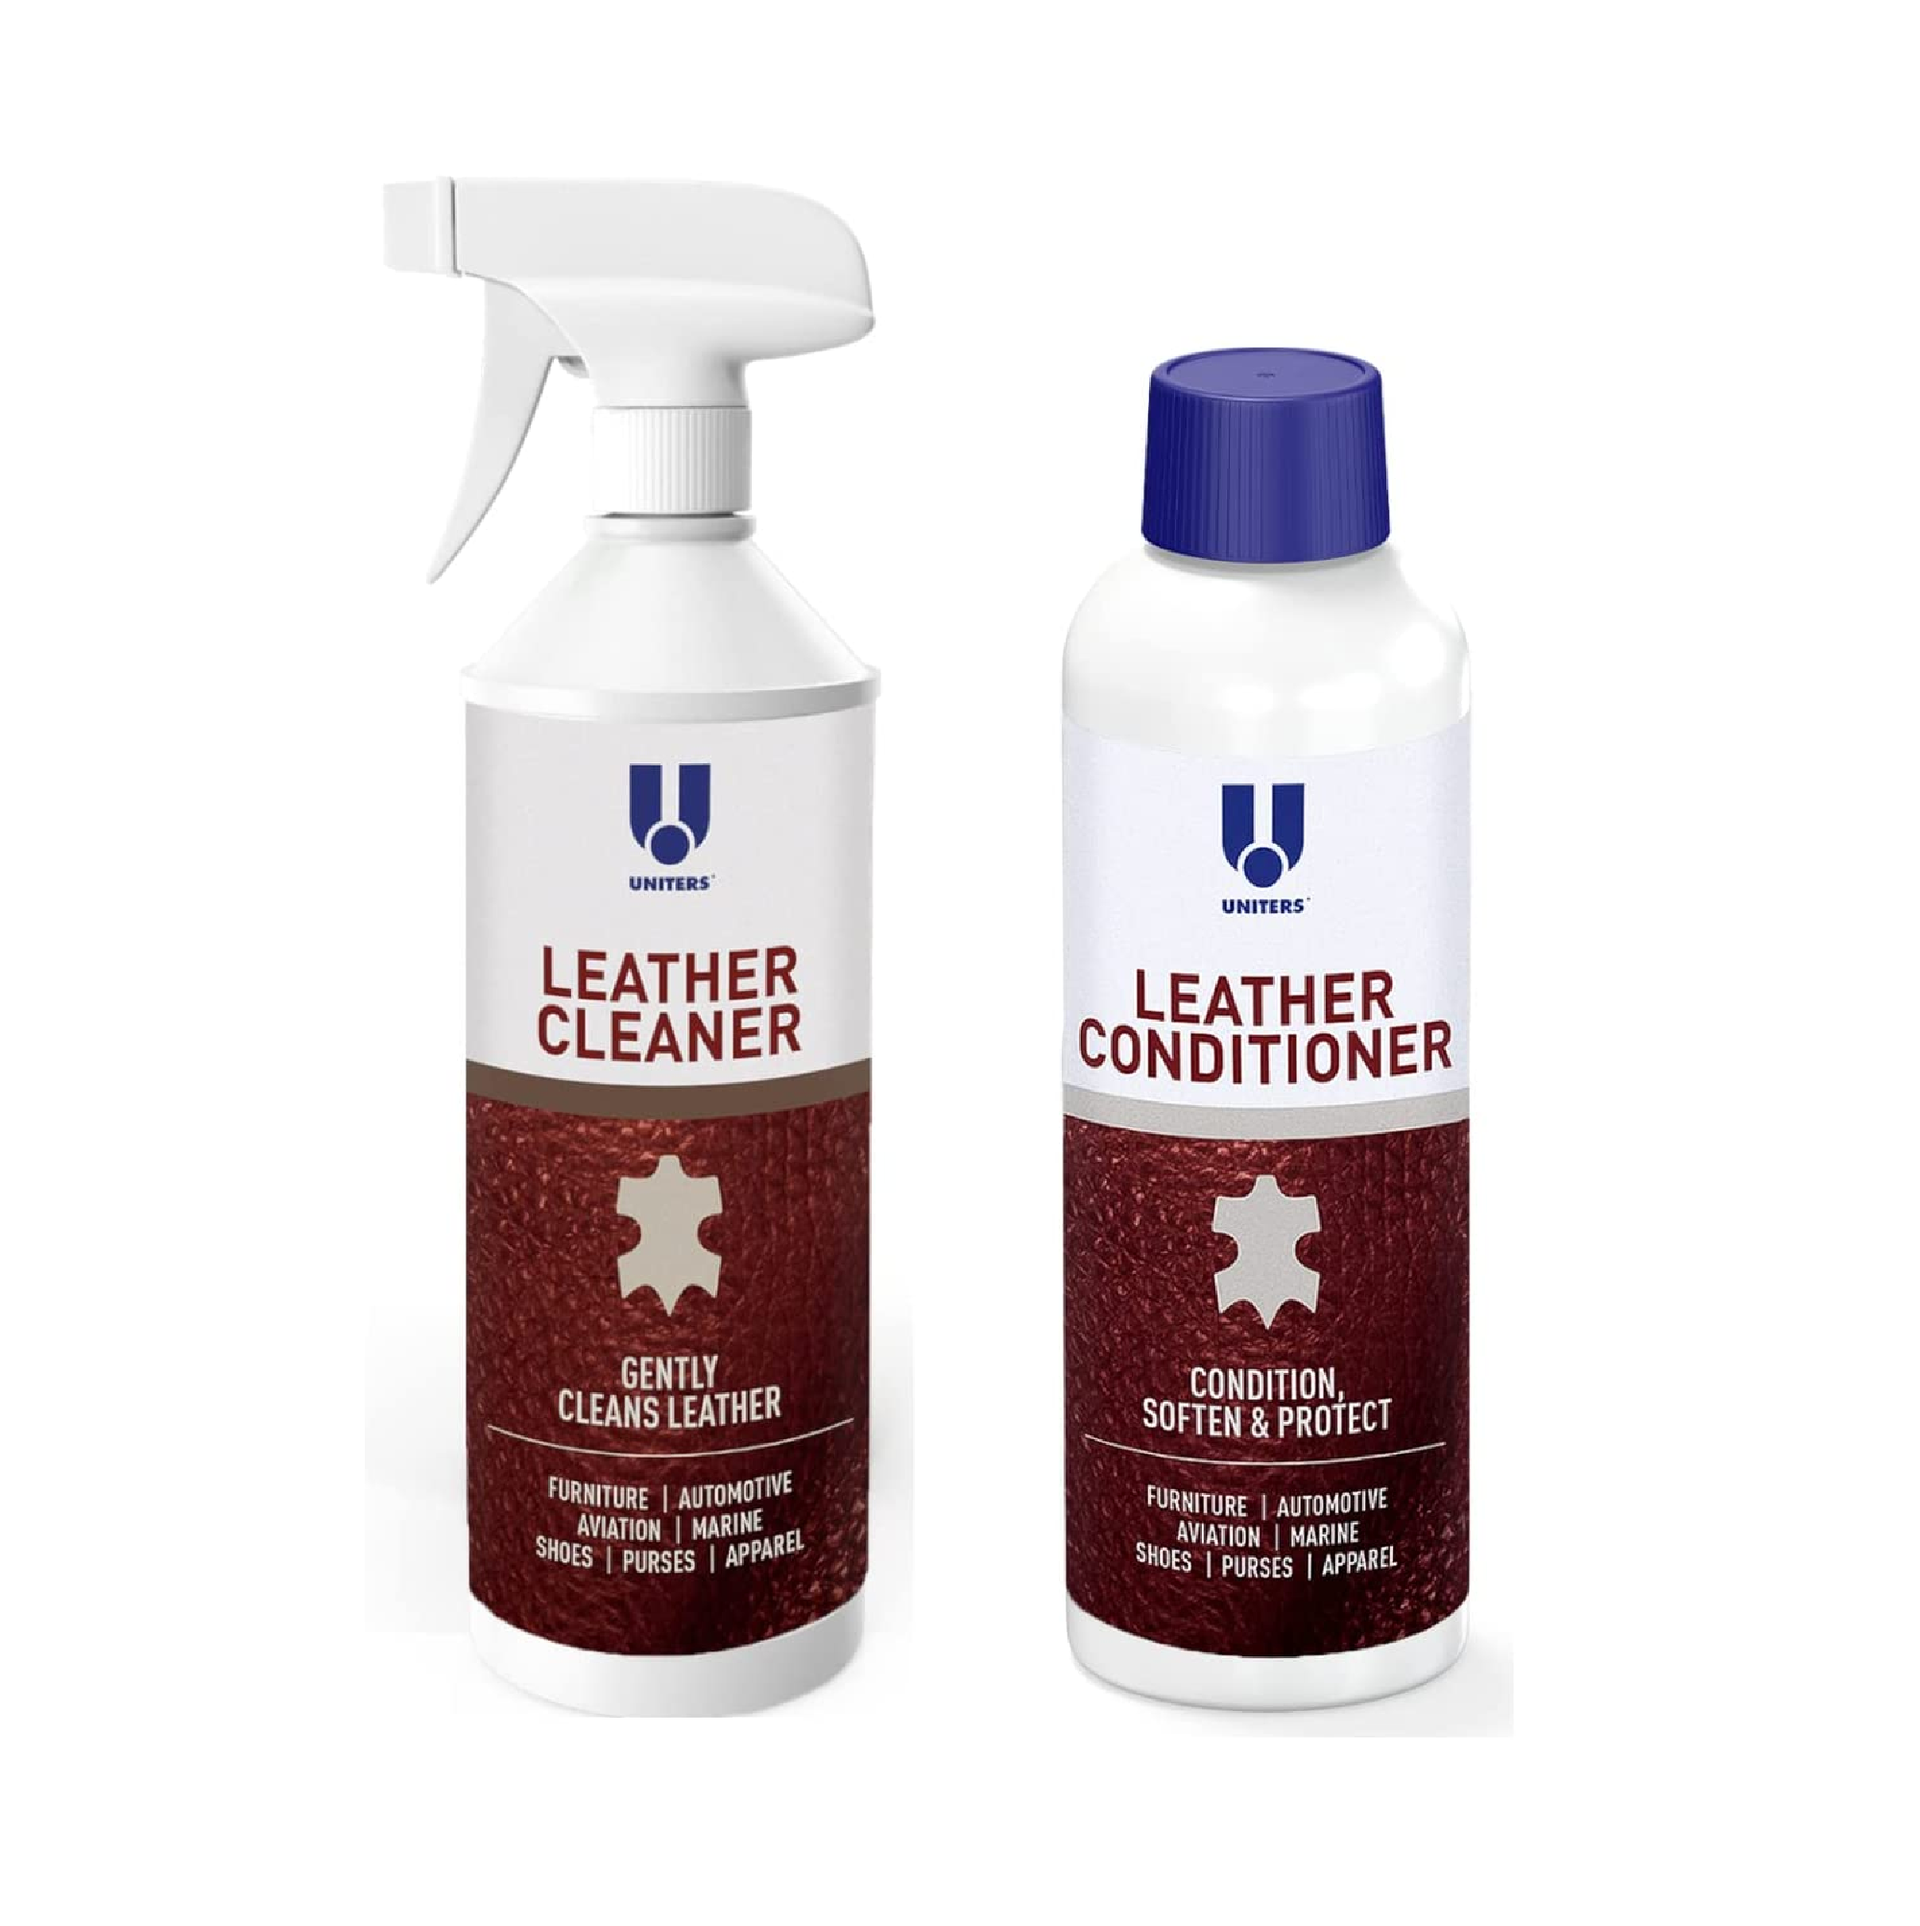 Leather Better Leather Conditioner for Furniture - Leather Cleaner and Restoration for Leather Couches, Boots and Shoes, Bags, Saddles and Tack